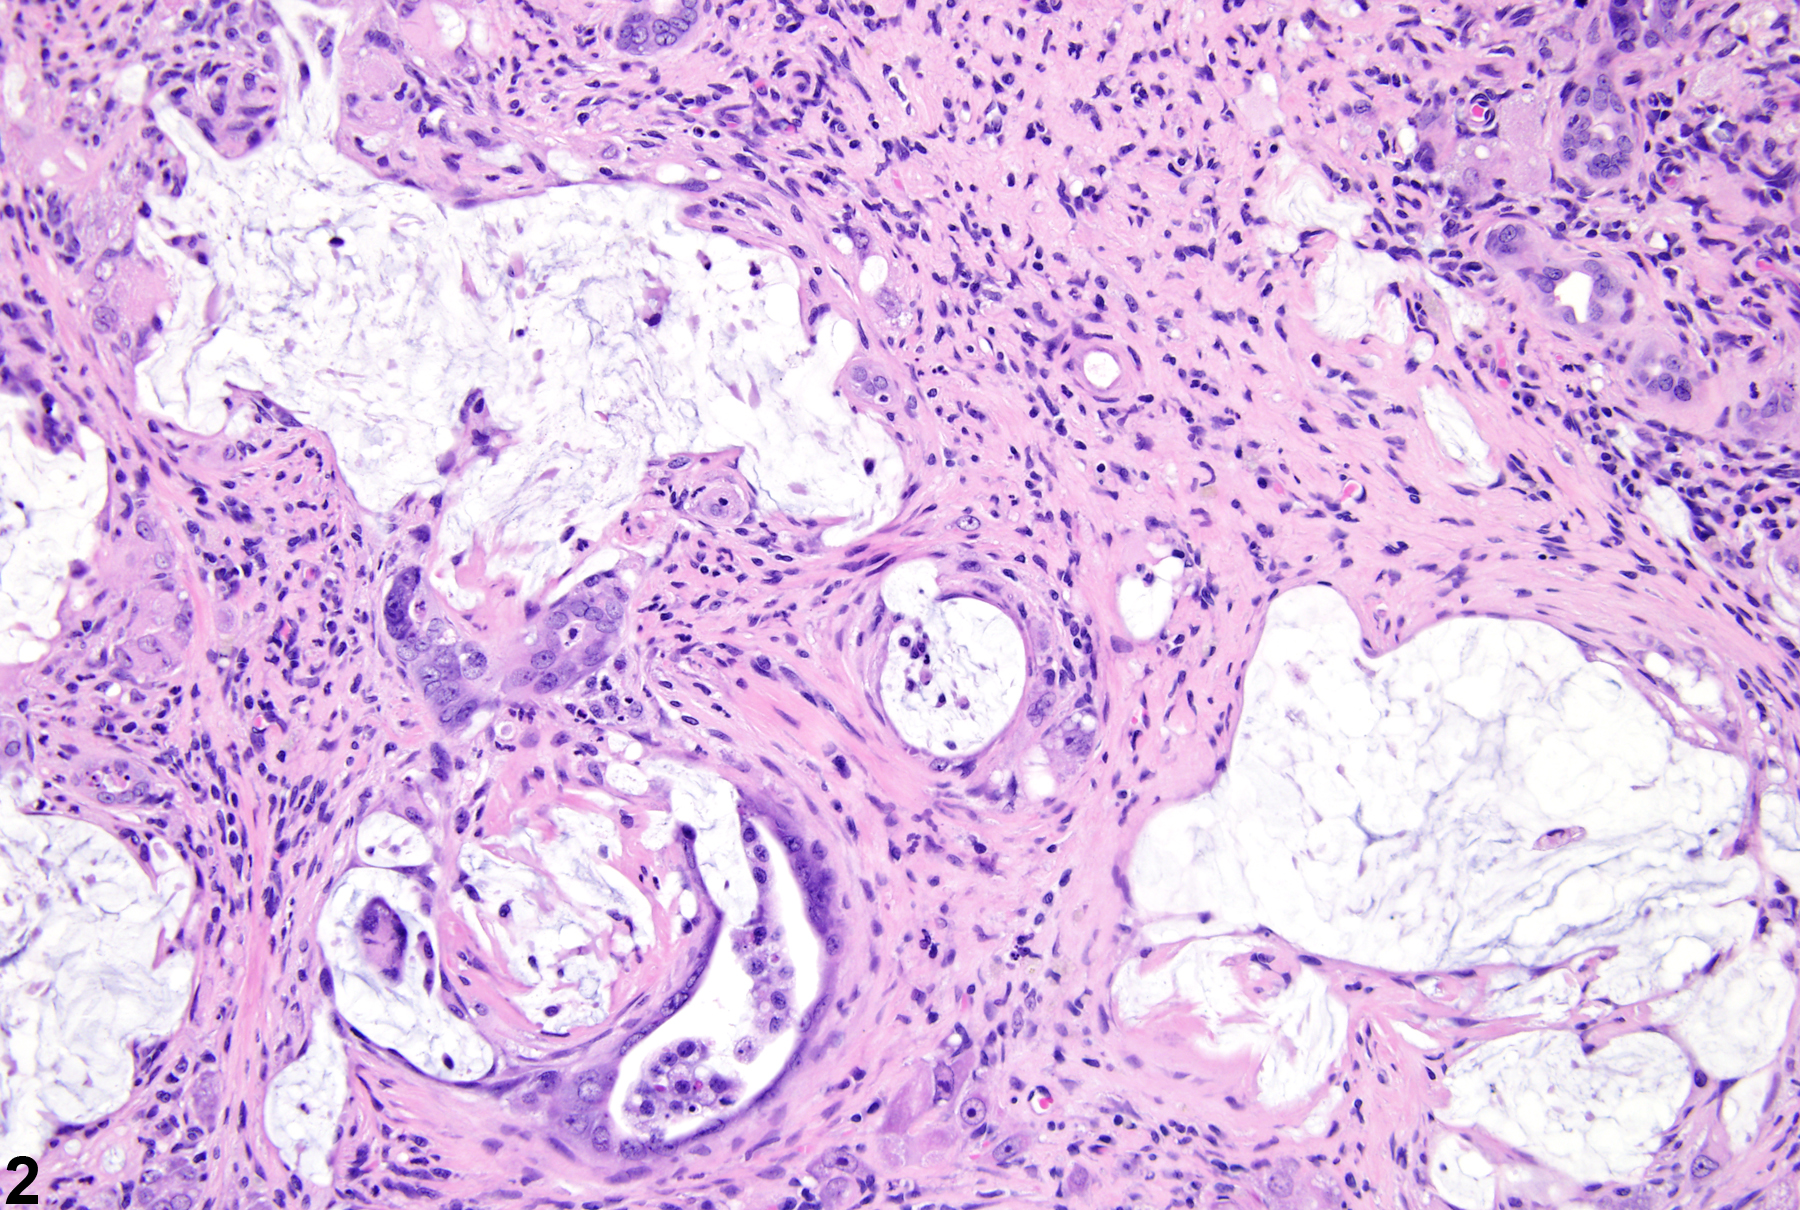 Image of cholangiofibrosis in the liver from a female Harlan Sprague-Dawley rat in a chronic study